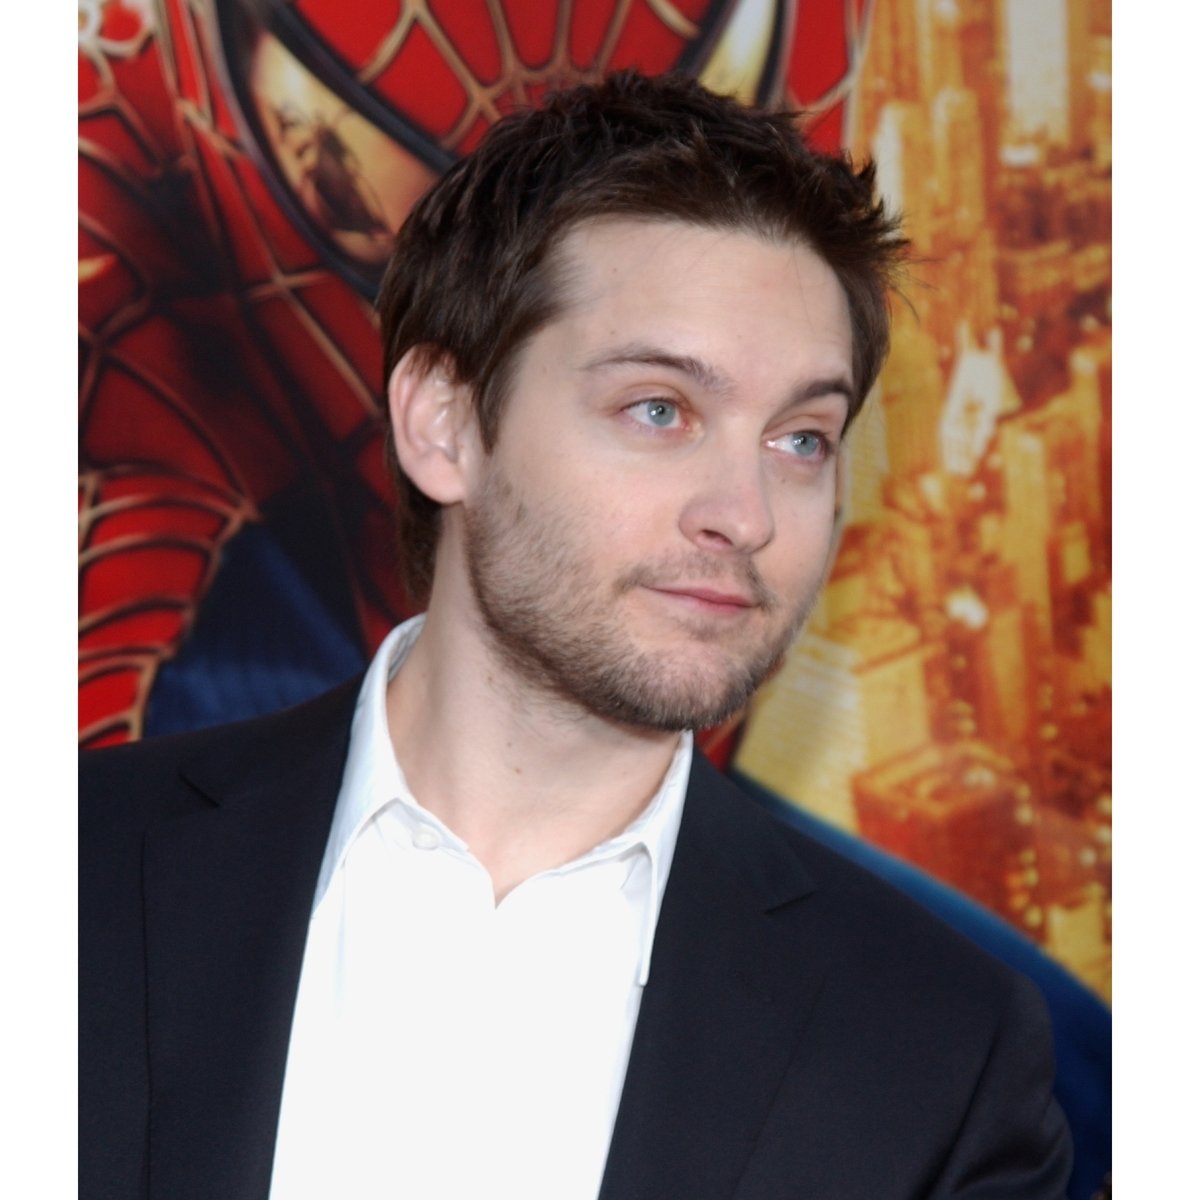 What 'Spider-Man' Actor Played Peter Parker First?